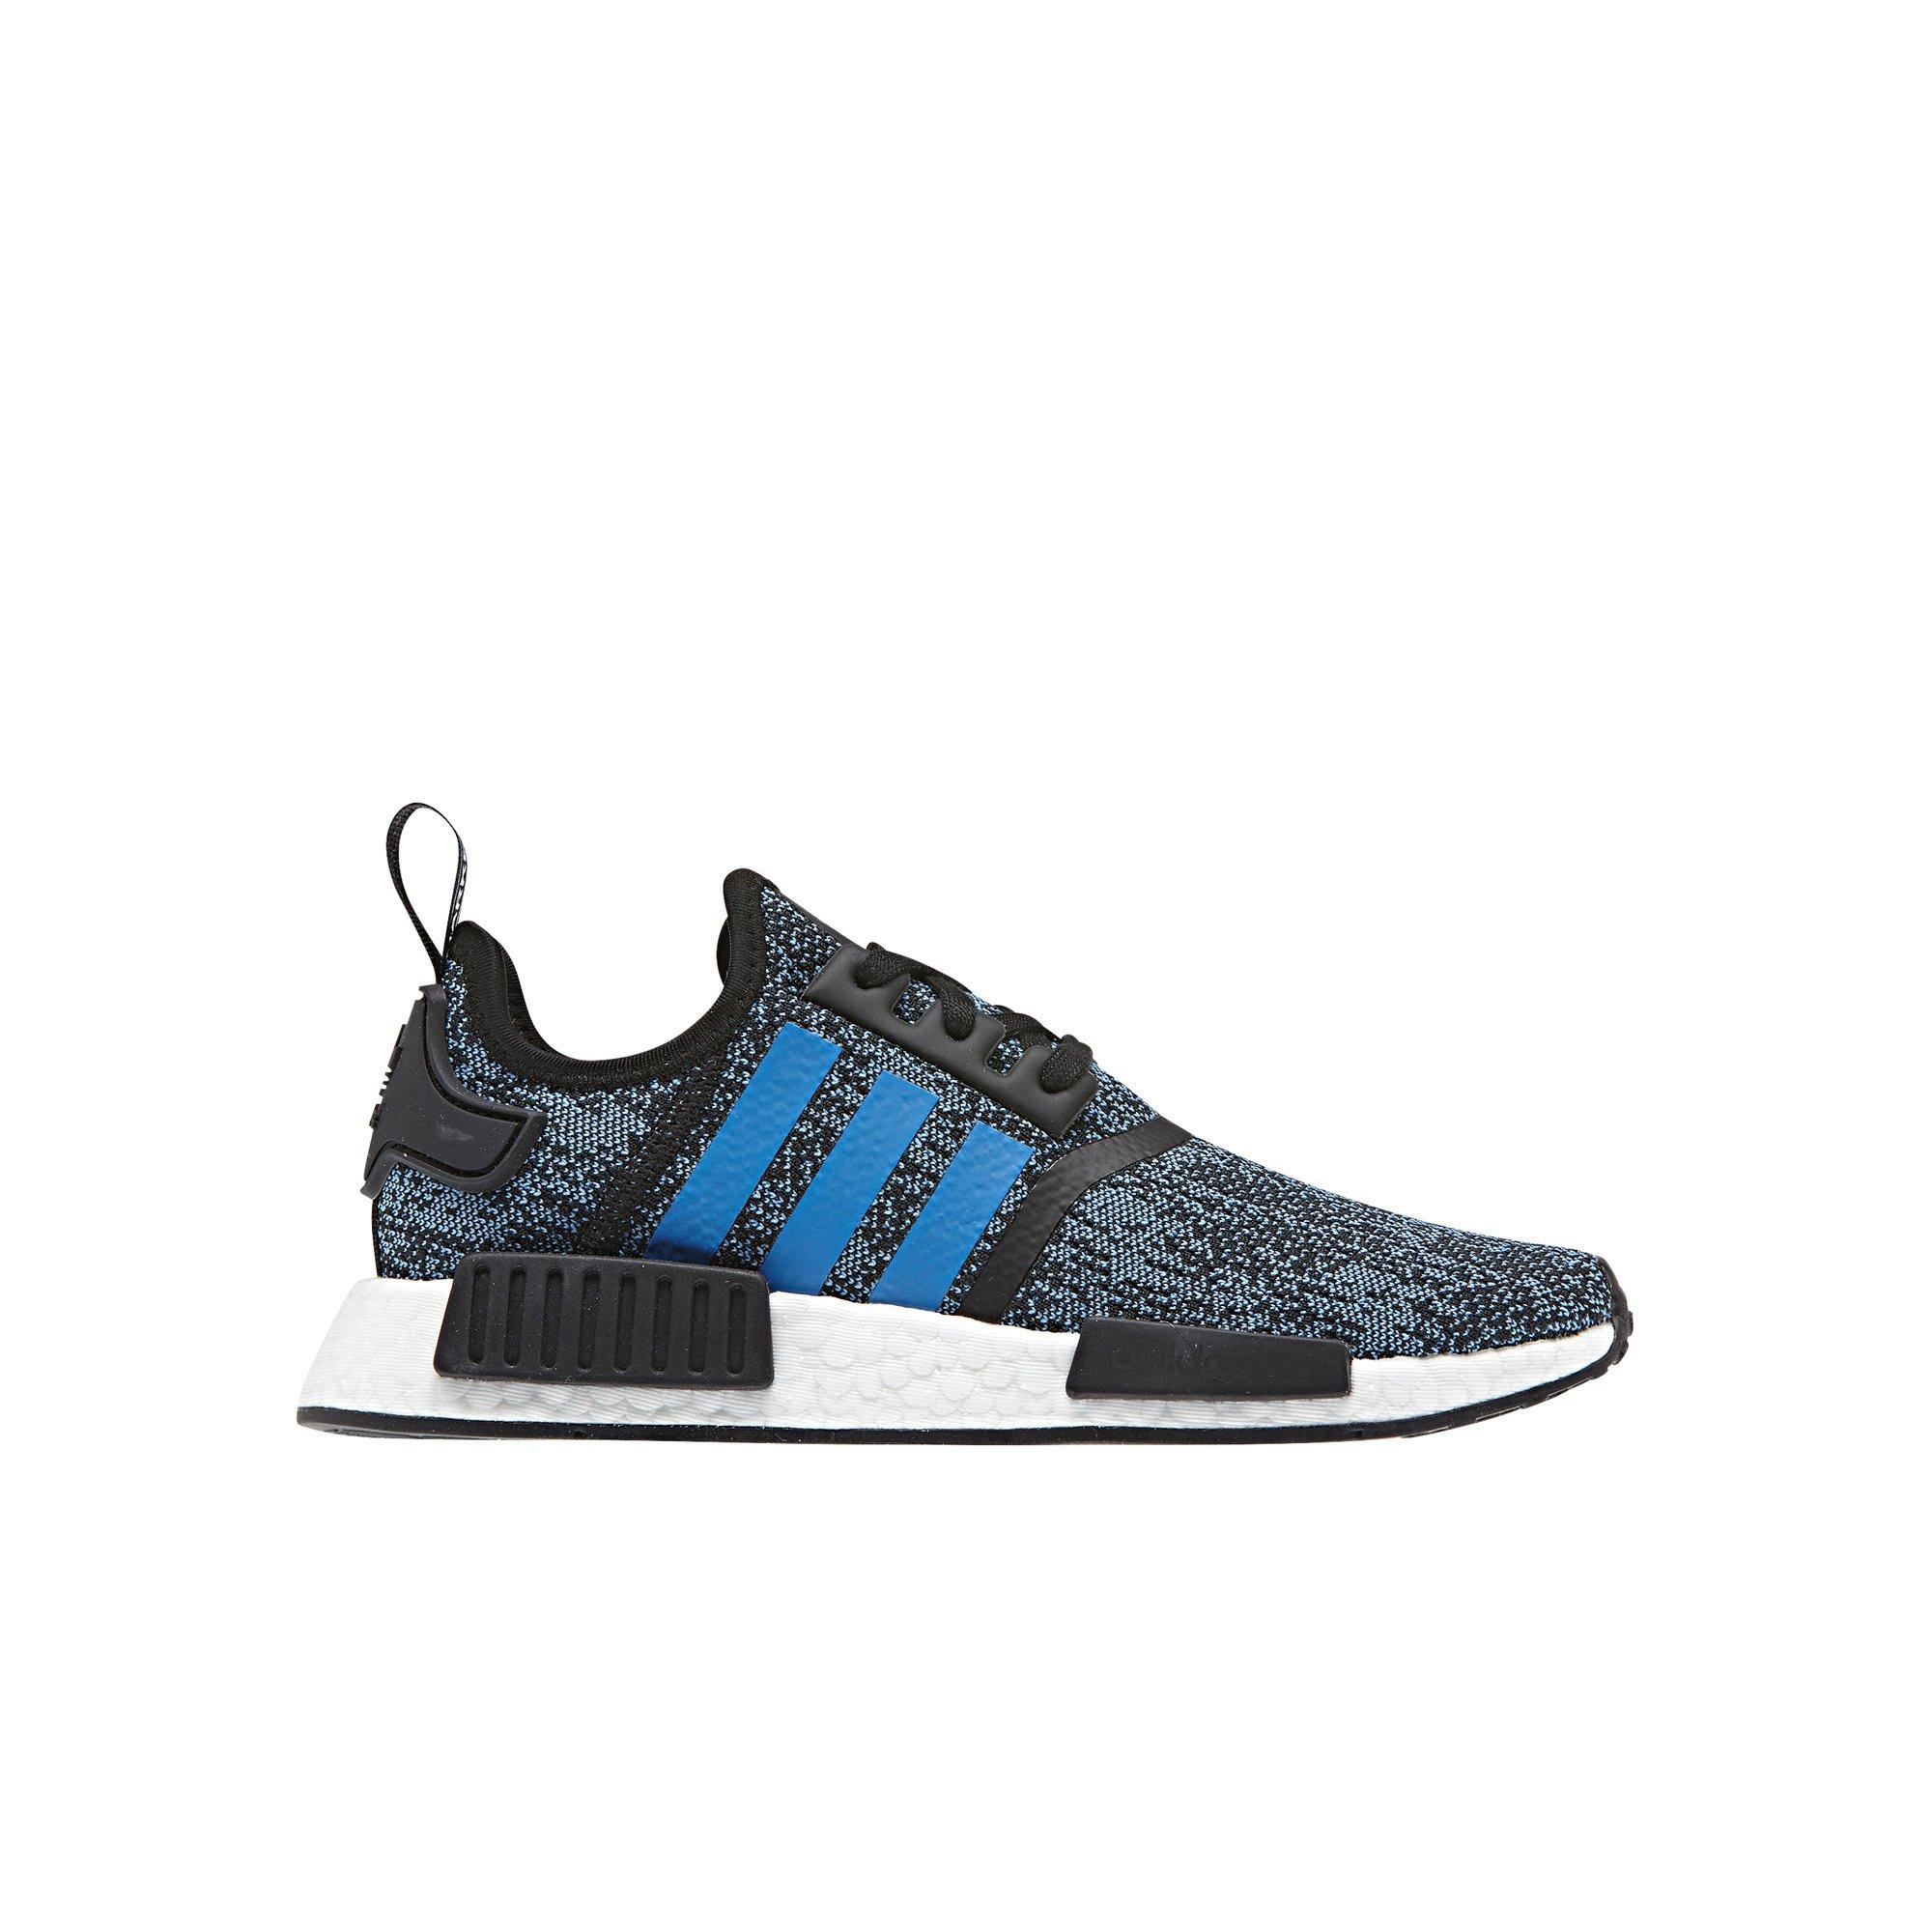 adidas nmd r1 true to size